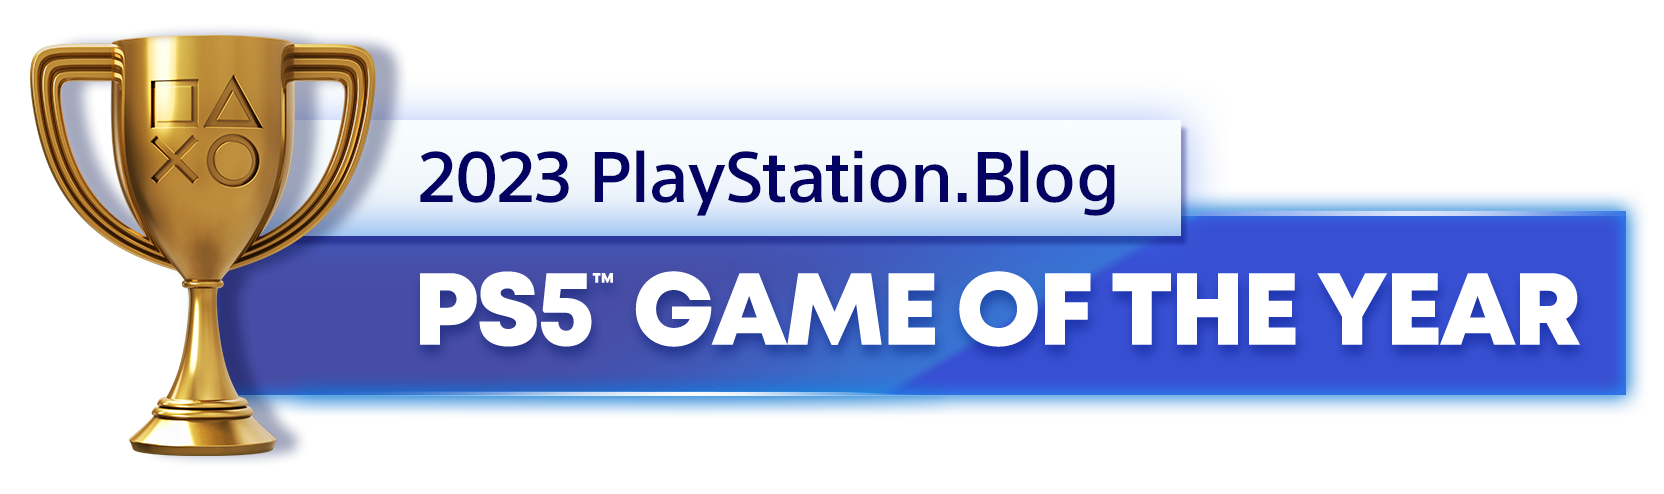  "Gold Trophy for the 2023 PlayStation Blog PS5 Game of the Year Winner"